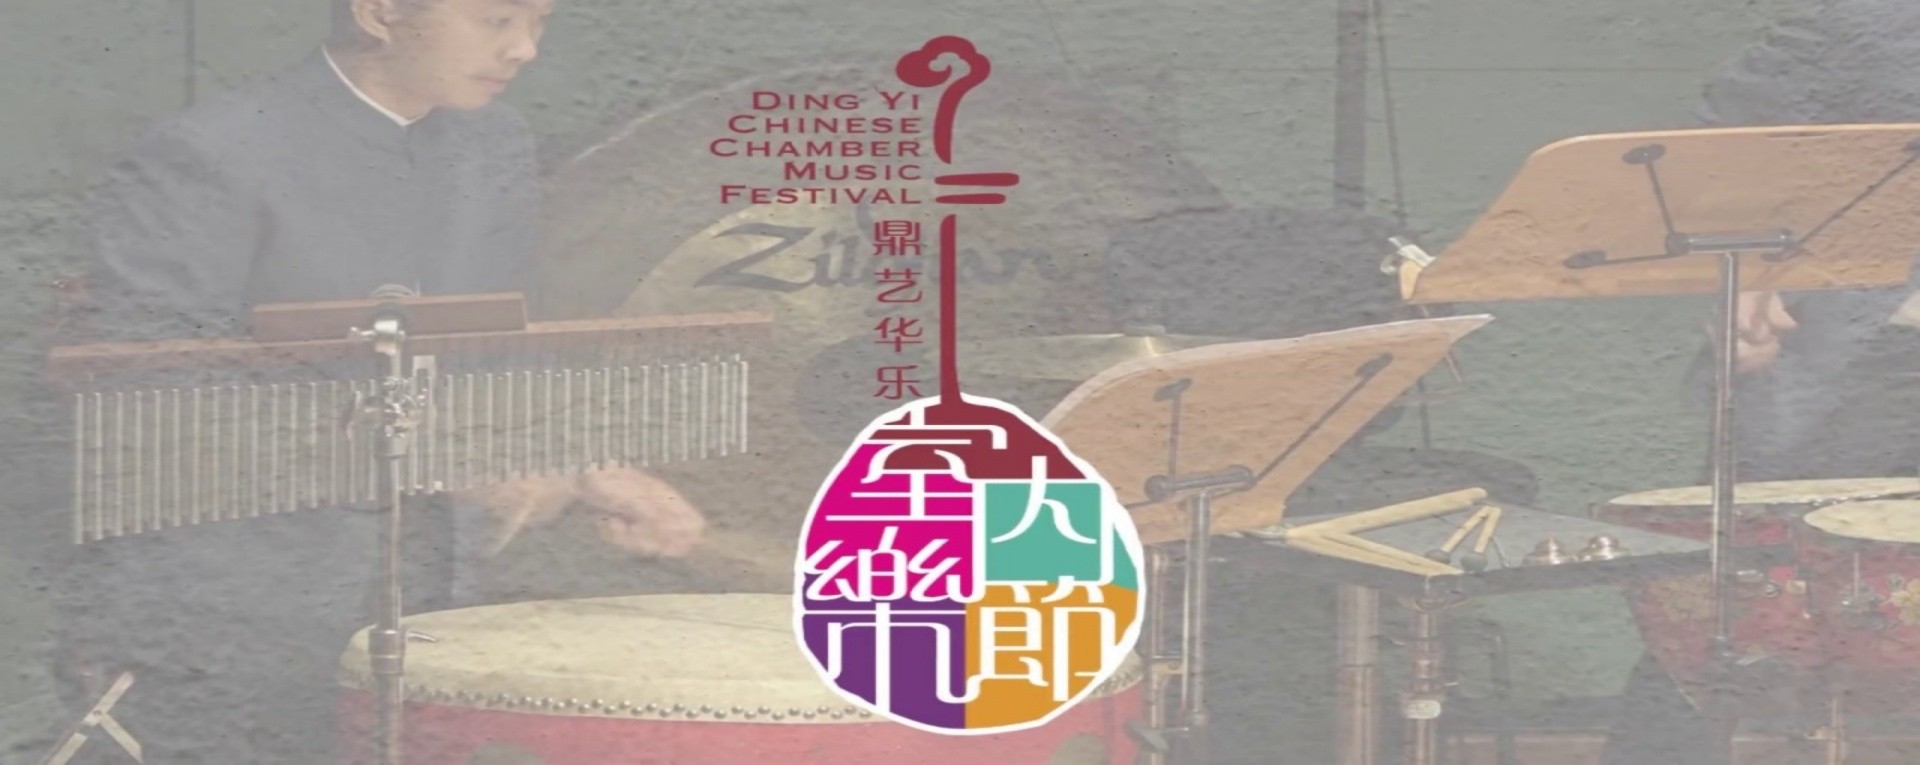 Ding Yi Chinese Chamber Music Festival 2019